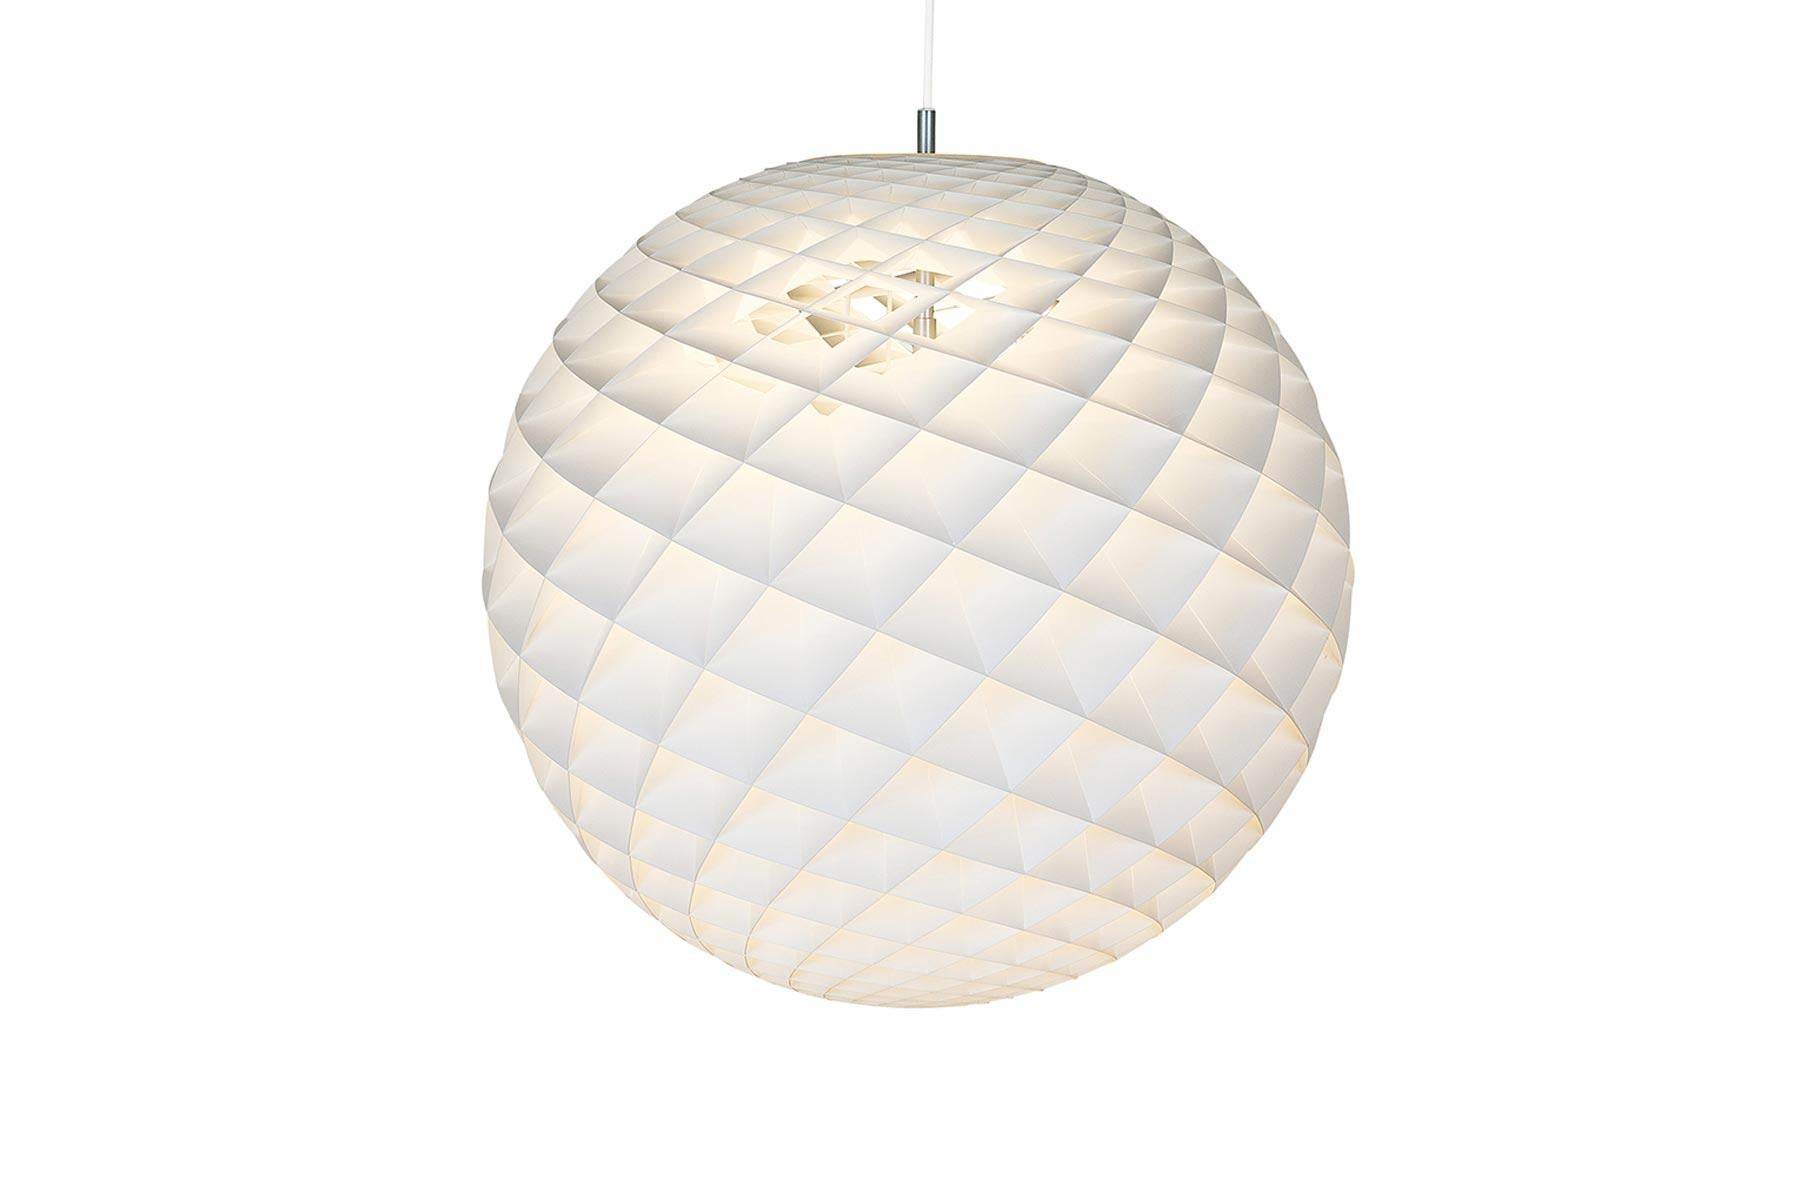 The pendant is a glowing sphere built up of small diamond-shaped cells. Each cell is carefully designed to capture light and to shield the light source from the viewing angles above 45 degrees. Each cell glows. Below 45 degrees, the fields are open